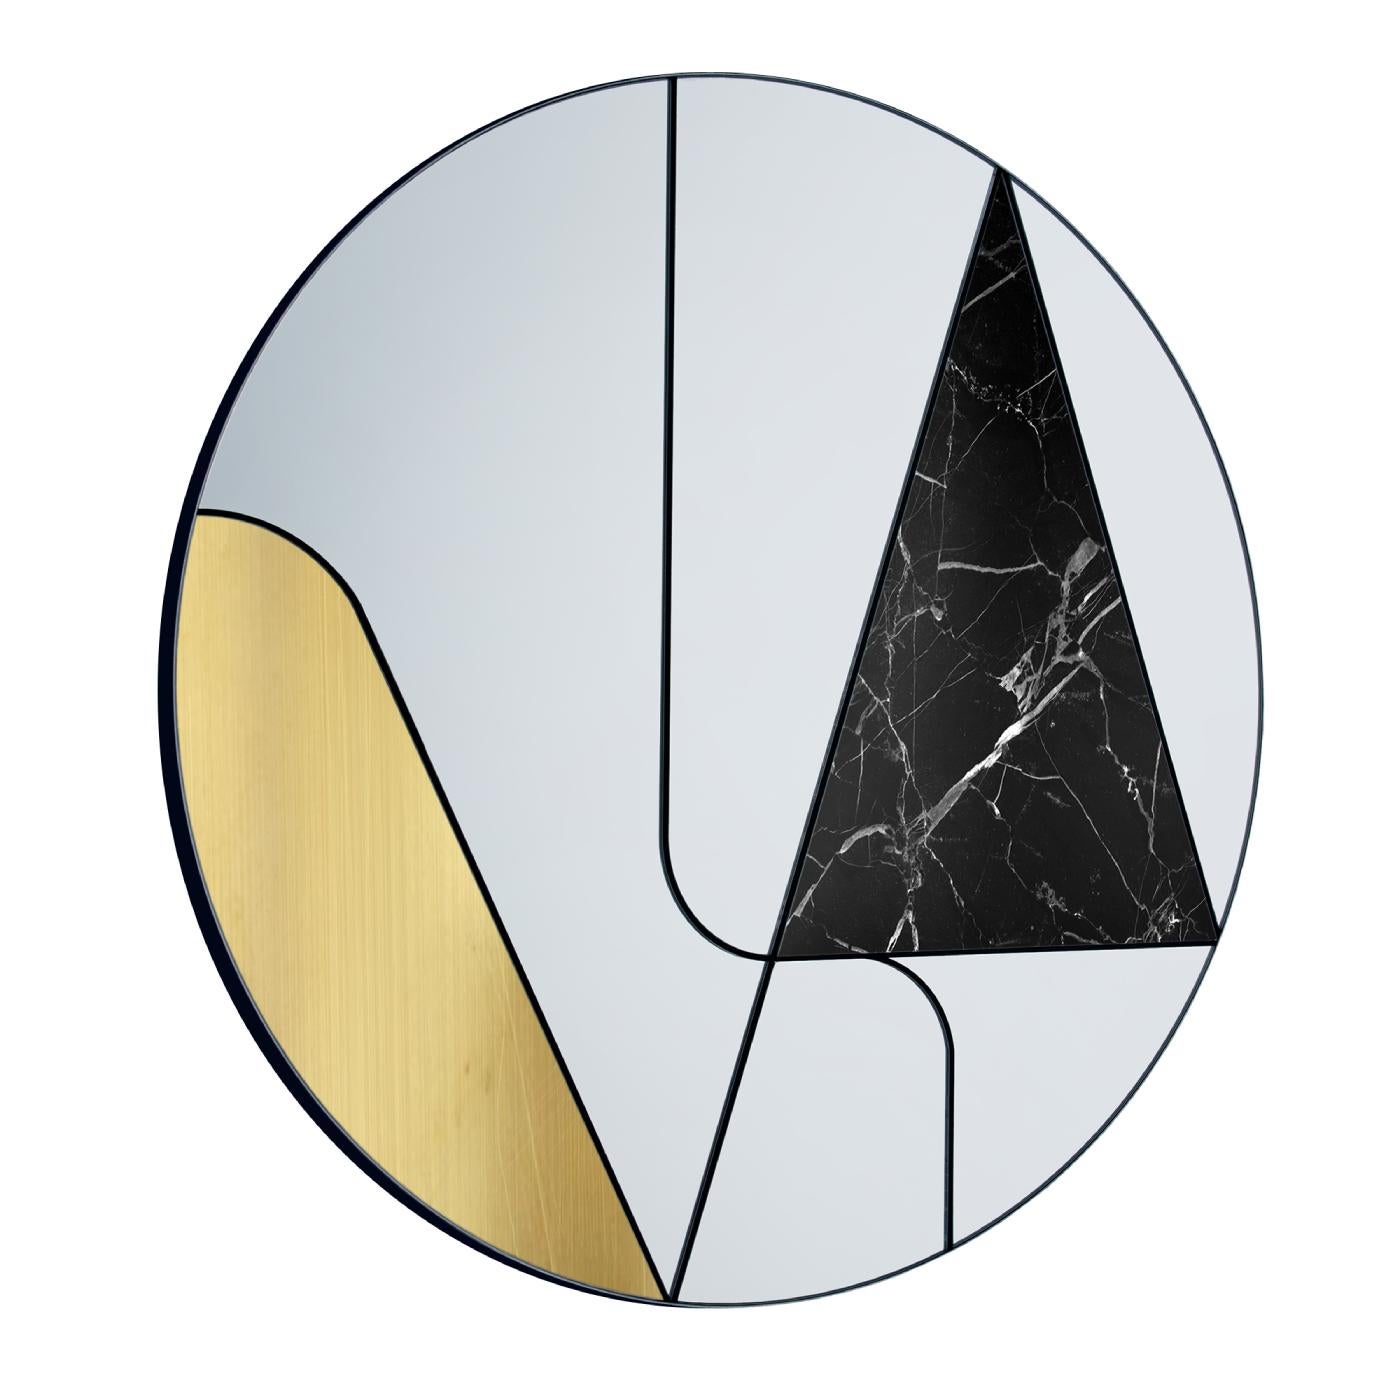 A series of lines cut the space within the round frame of this magnificent mirror, the asymmetric mirrored surfaces adorned with a curved insert in brushed brass and a triangular slab of black Marquina marble. This captivating design is entirely